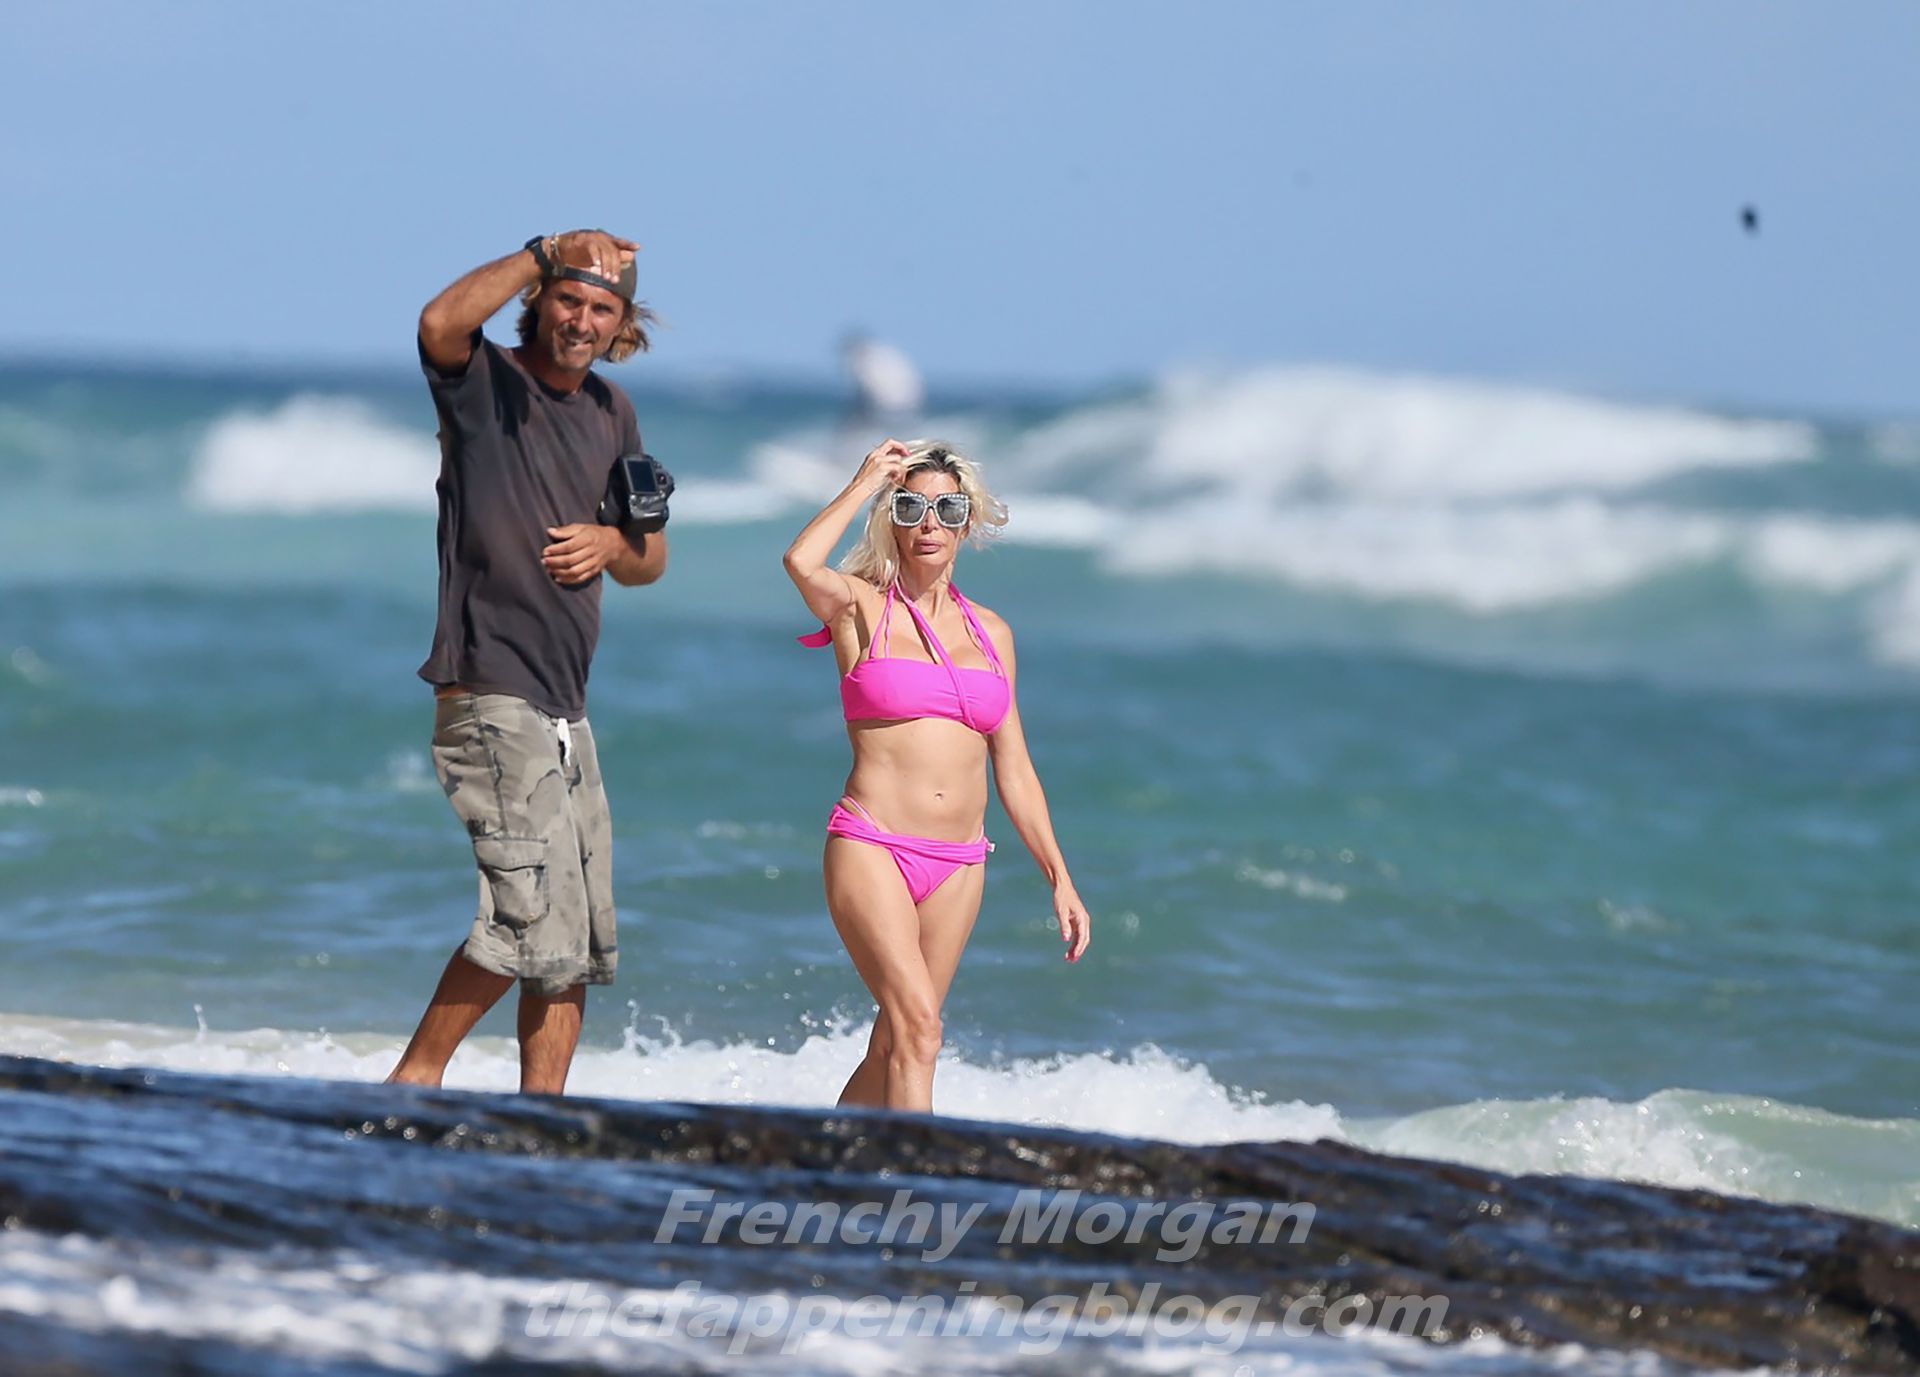 Frenchy Morgan is Spotted Posing on the Beach in Hawaii (9 Photos)